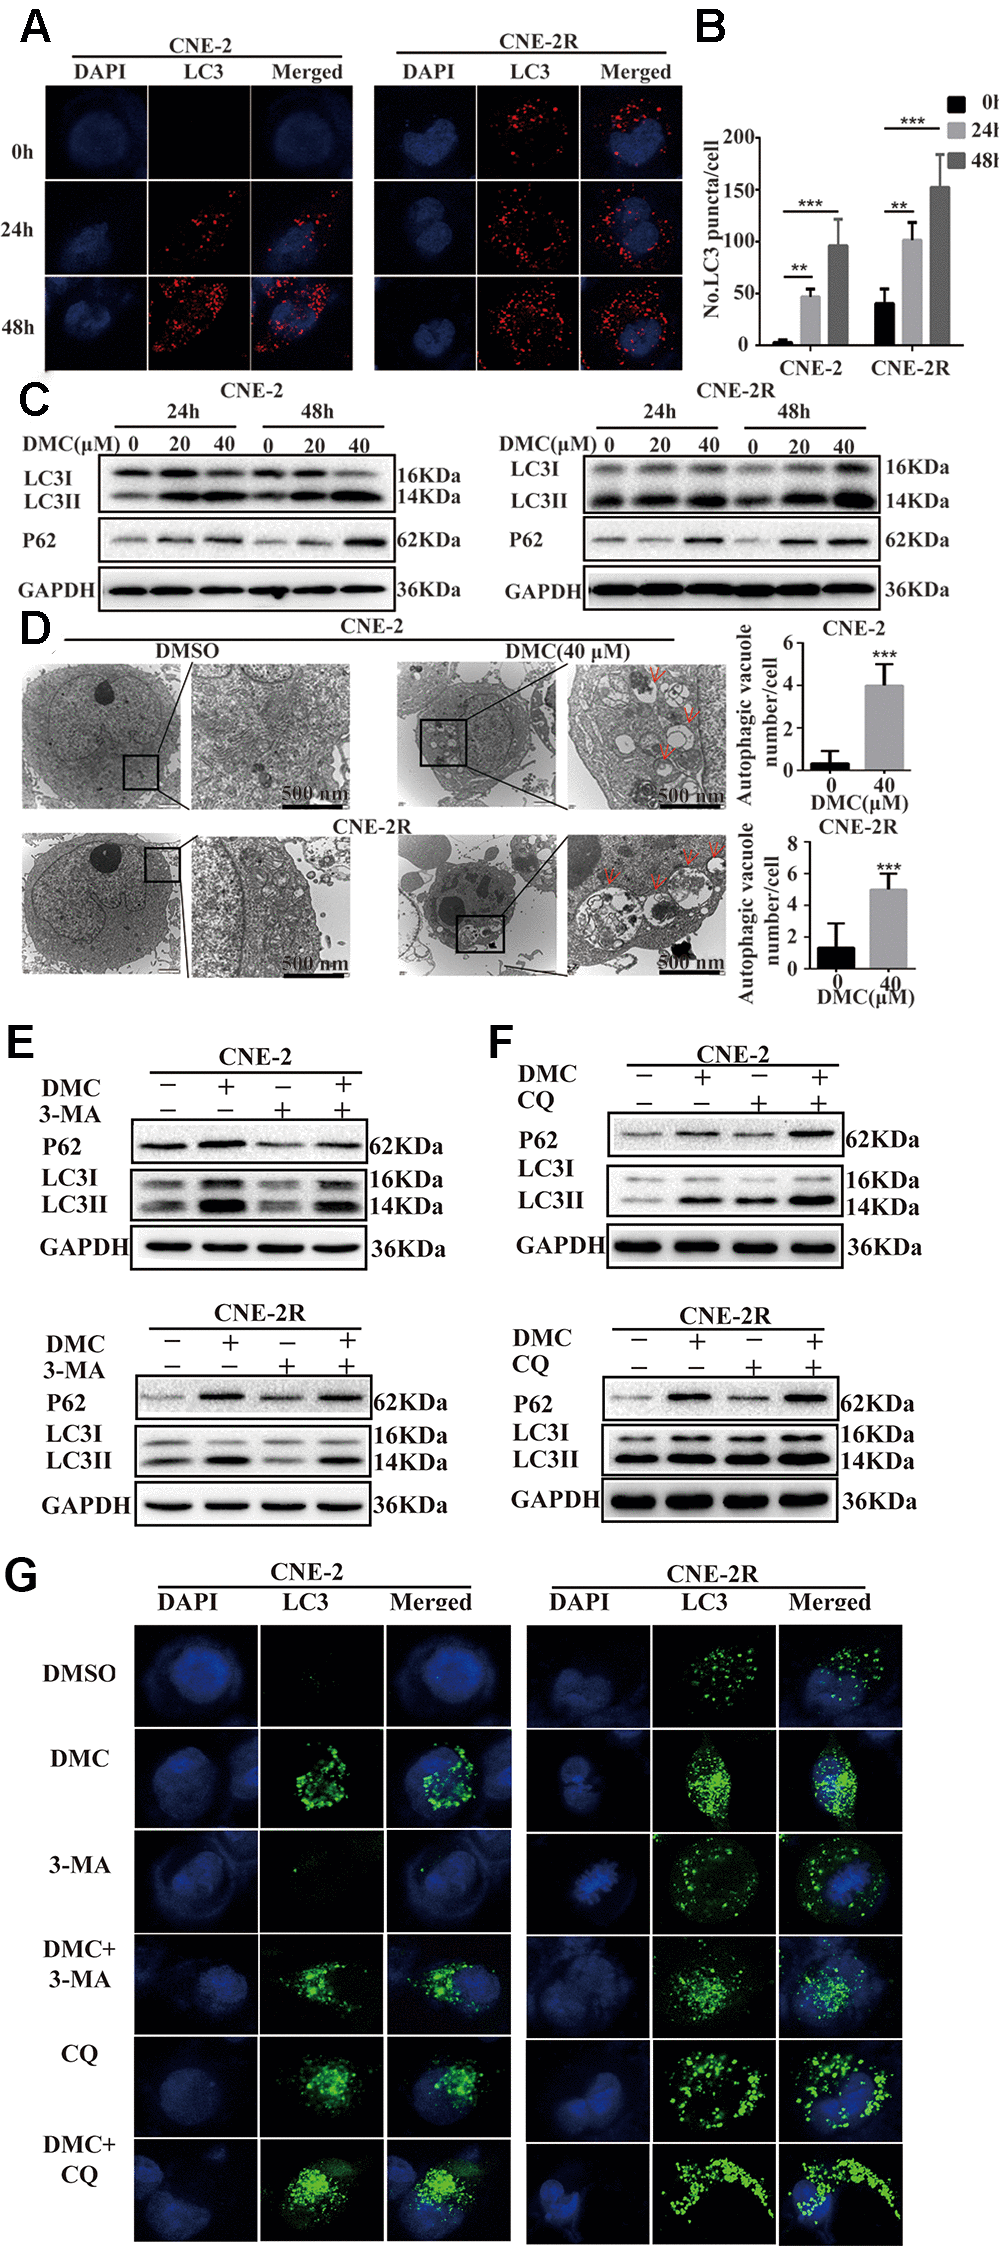 DMC increased the marker proteins of autophagy and autophagosomes in NPC cells. (A) Representative images of LC3-labelled red fluorescence puncta after 20 μM DMC for 0, 24, 48 h in CNE-2 and CNE-2R cells. Scale bars: 10 μm. (B) Statistical analysis histogram of LC3-labeled red fluorescence puncta in per cell and over 30 cells were counted in each group. (n = 3; **p ***p C) Western blotting analysis of LC3-I, LC3-II and P62 levels in CNE-2 and CNE-2R cells treated with the indicated concentrations of DMC for 24 h and 48 h. GAPDH was used as a loading control. (D) Transmission electron microscopy images in CNE-2 and CNE-2R cells after treating with control or DMC (40 μM) for 24 h. Red arrows: autophagosomes. Scale bars: 500 nm. (E, F) Western blotting analysis of LC3-I, LC3-II and P62 levels in CNE-2 and CNE-2R cells after treating with 0.1% DMSO or 20 μM DMC in the absence or presence of 3-MA (5 mM) and CQ (20 μM) for 24 h. GAPDH was used as a loading control. (G) Representative images of LC3-labelled green fluorescence puncta after treating with 0.1% DMSO or 20 μM DMC in the absence or presence of 3-MA (5 mM) and CQ (20 μM) for 24 h in CNE-2 and CNE-2R cells. Scale bars: 10 μm.